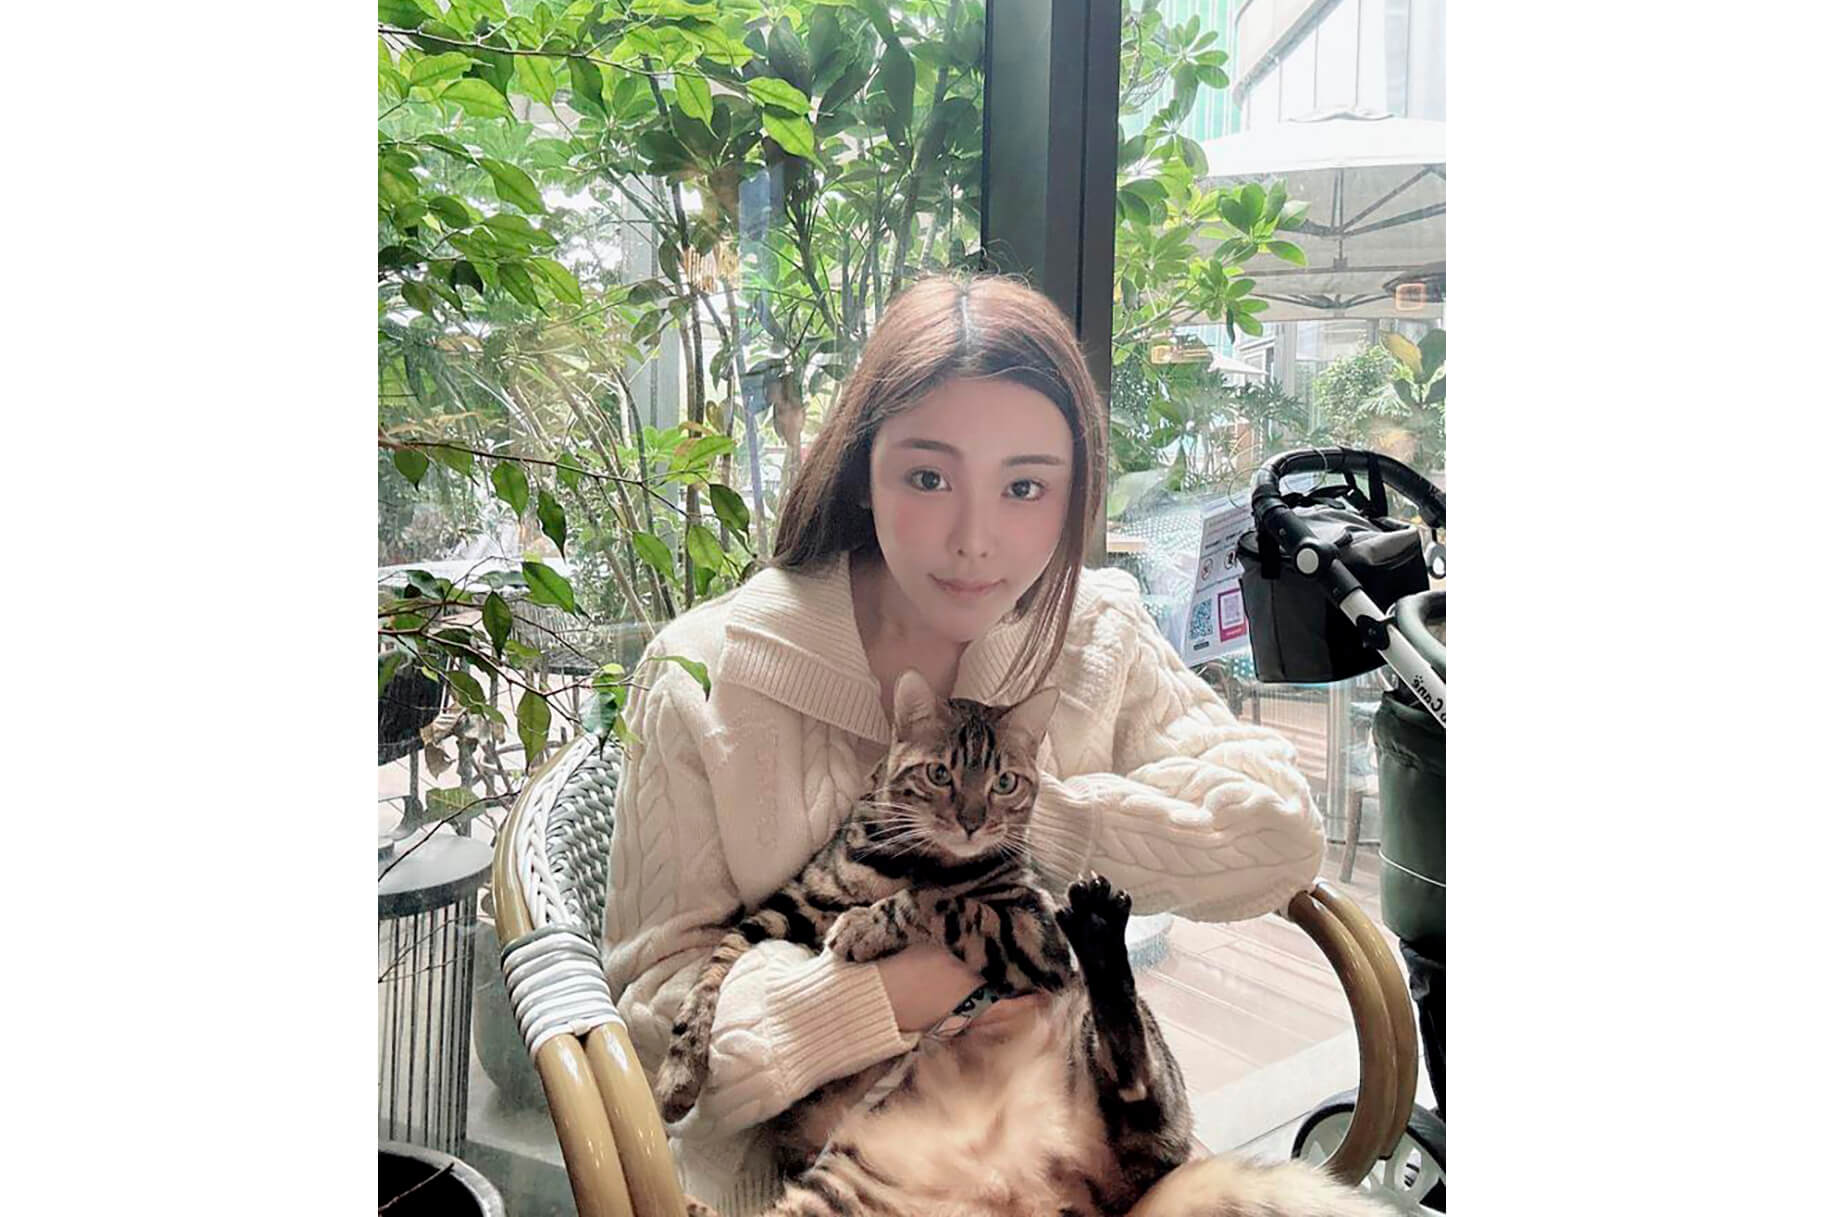 model Abby Choi, holding a cat, poses for a photo on Feb. 11, 2023, in Hong Kong